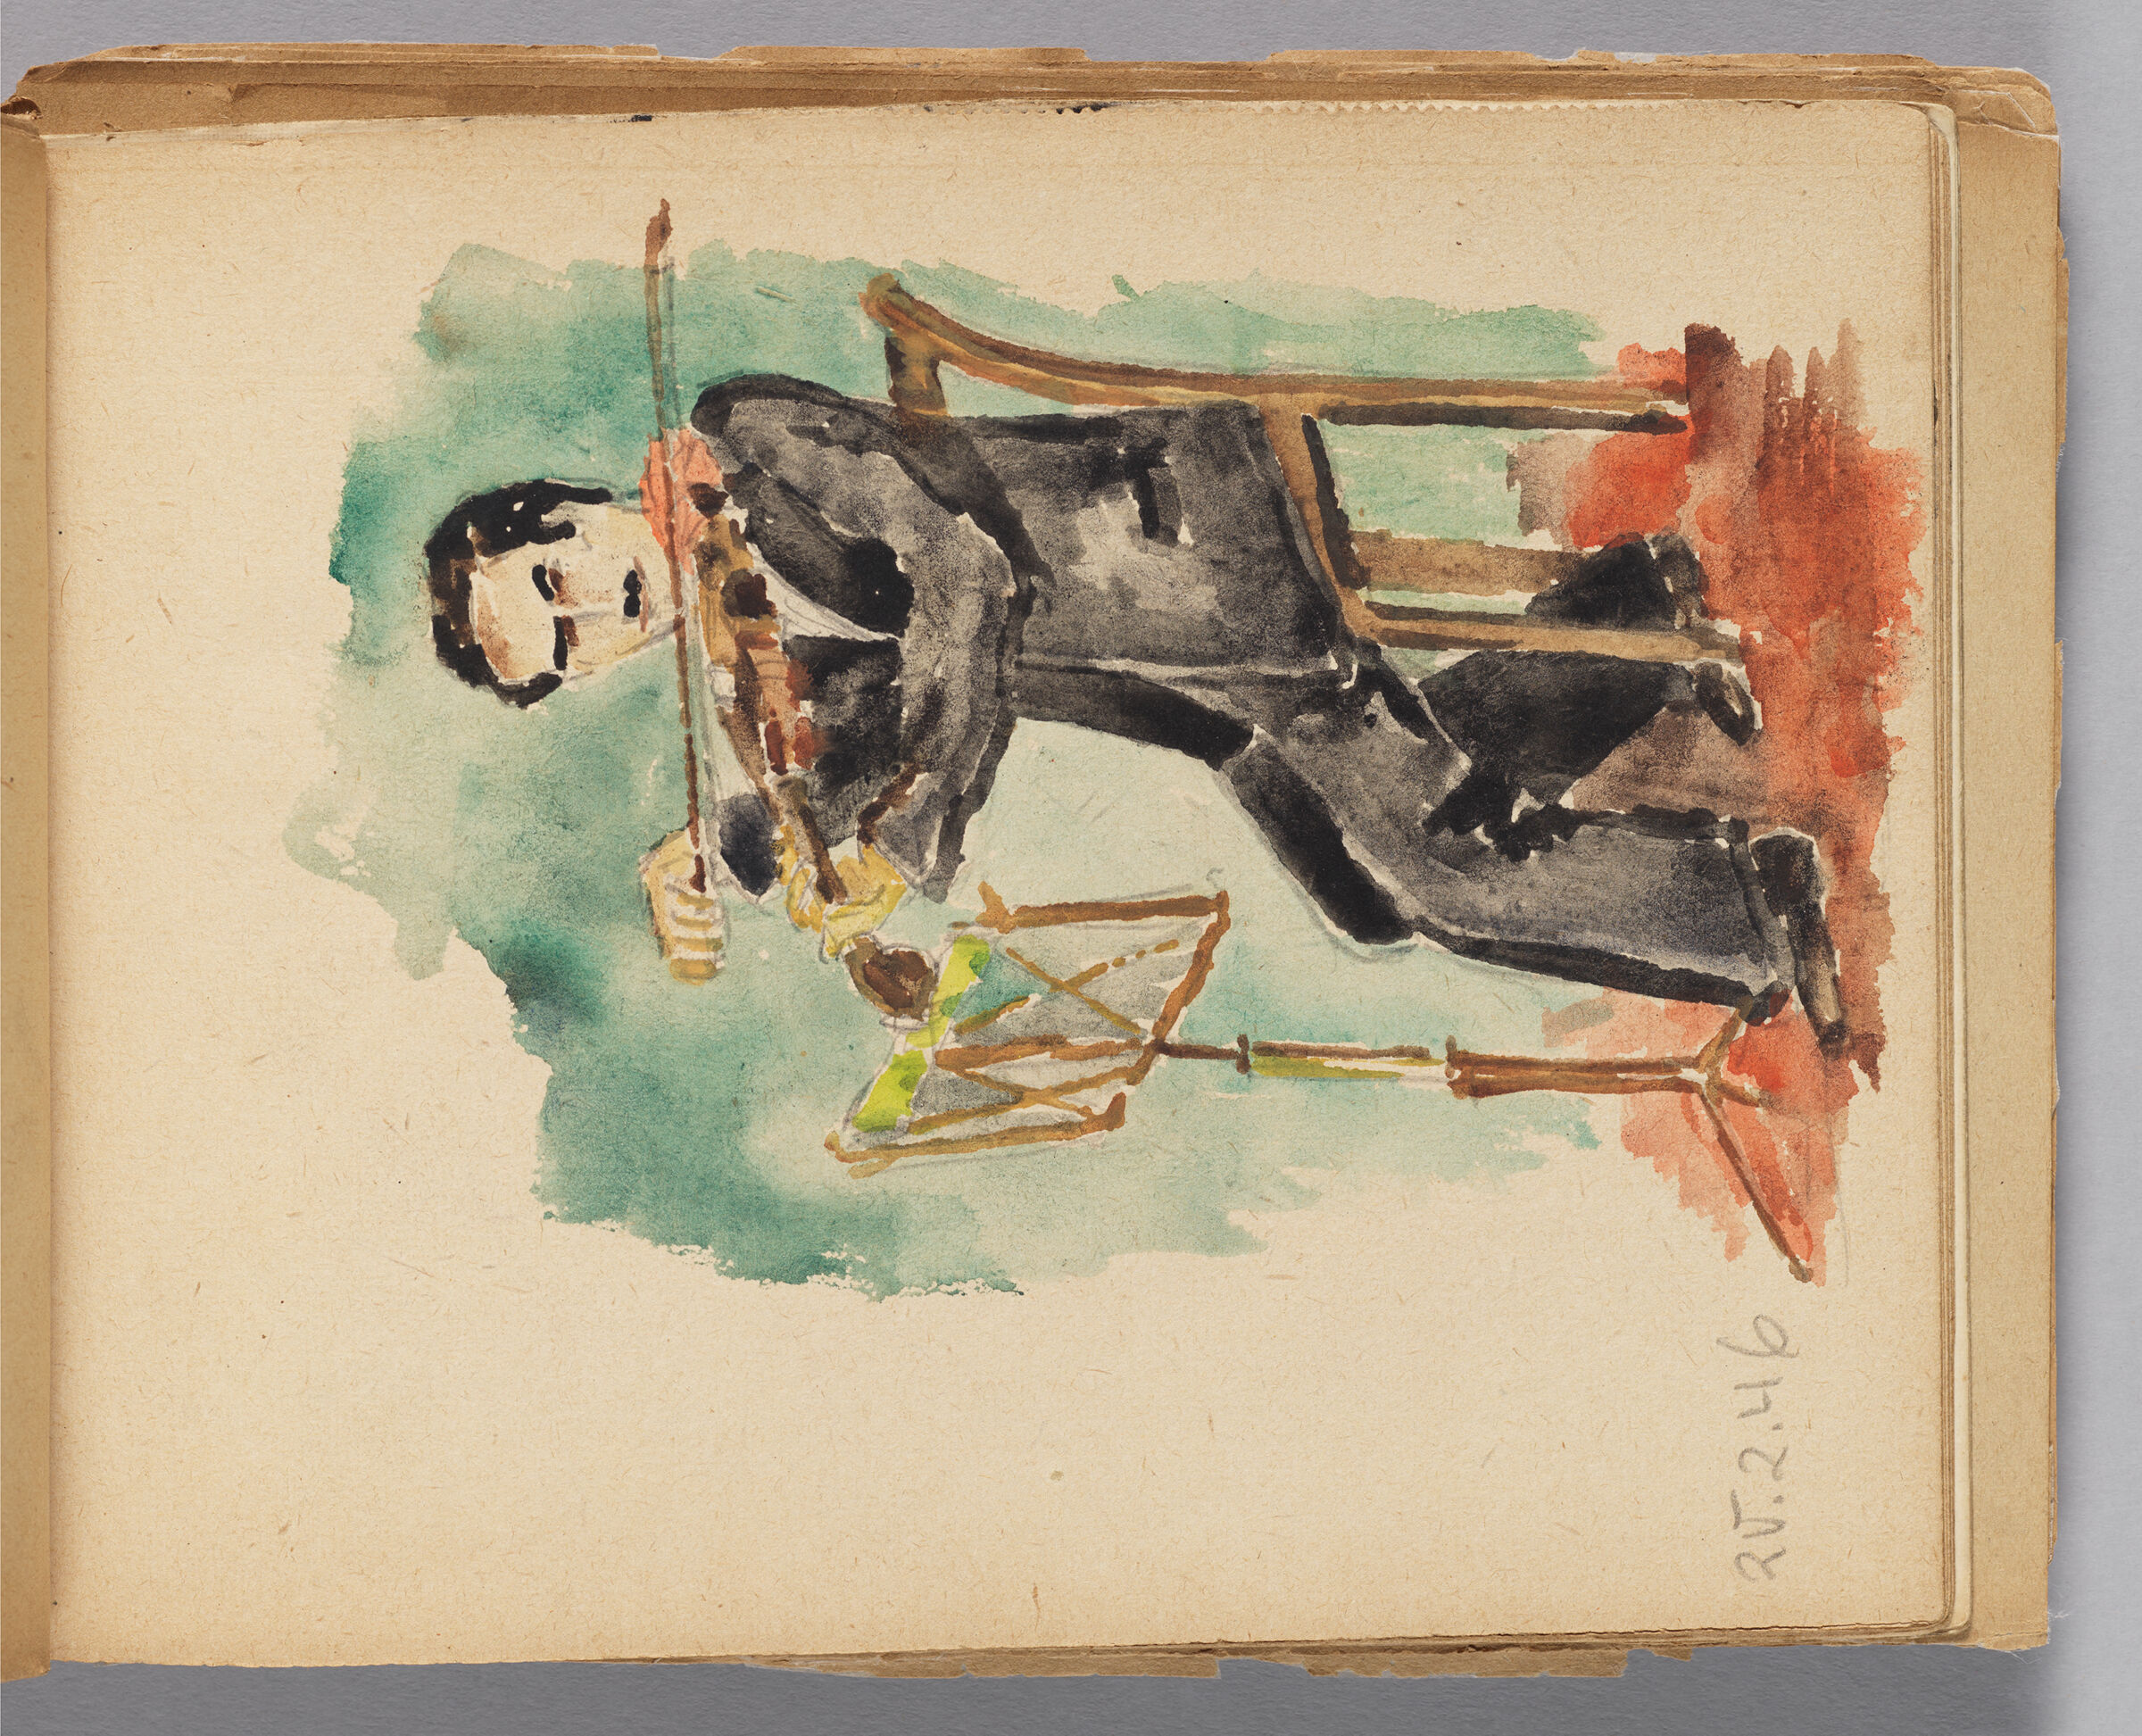 Untitled (Blank, Left Page); Untitled (Violinist, Right Page)